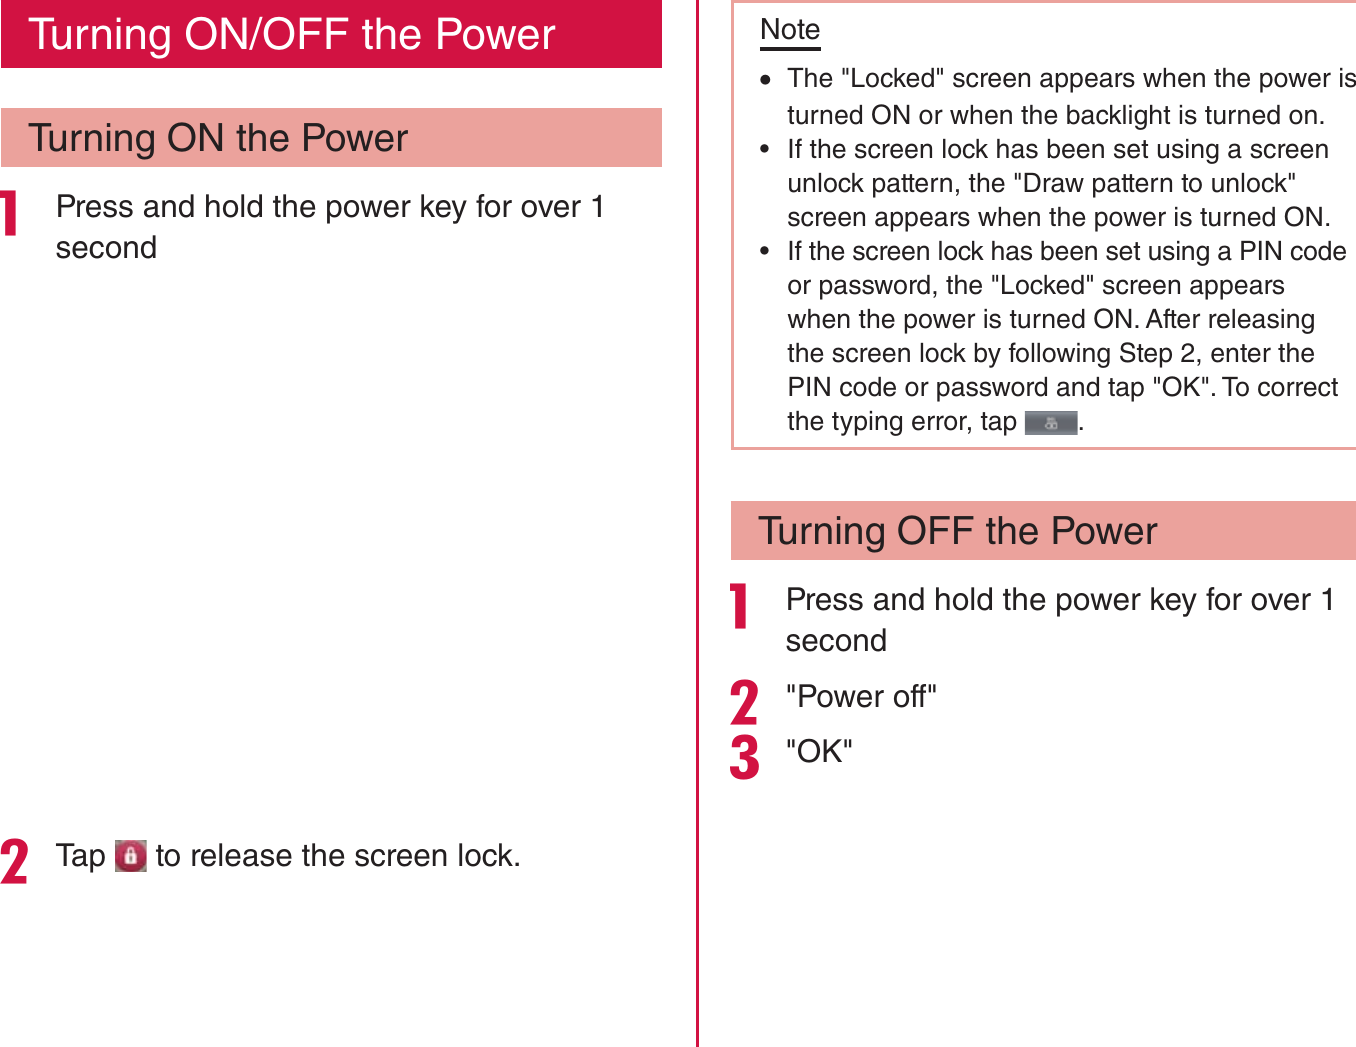 Turning ON/OFF the PowerTurning ON the Power Press and hold the power key for over 1 secondTap   to release the screen lock.Note rThe &quot;Locked&quot; screen appears when the power is turned ON or when the backlight is turned on. rIf the screen lock has been set using a screen unlock pattern, the &quot;Draw pattern to unlock&quot; screen appears when the power is turned ON. rIf the screen lock has been set using a PIN code or password, the &quot;Locked&quot; screen appears when the power is turned ON. After releasing the screen lock by following Step 2, enter the PIN code or password and tap &quot;OK&quot;. To correct the typing error, tap  .Turning OFF the Power Press and hold the power key for over 1 second&quot;Power off&quot;&quot;OK&quot;40Confirmation and Settings before Using